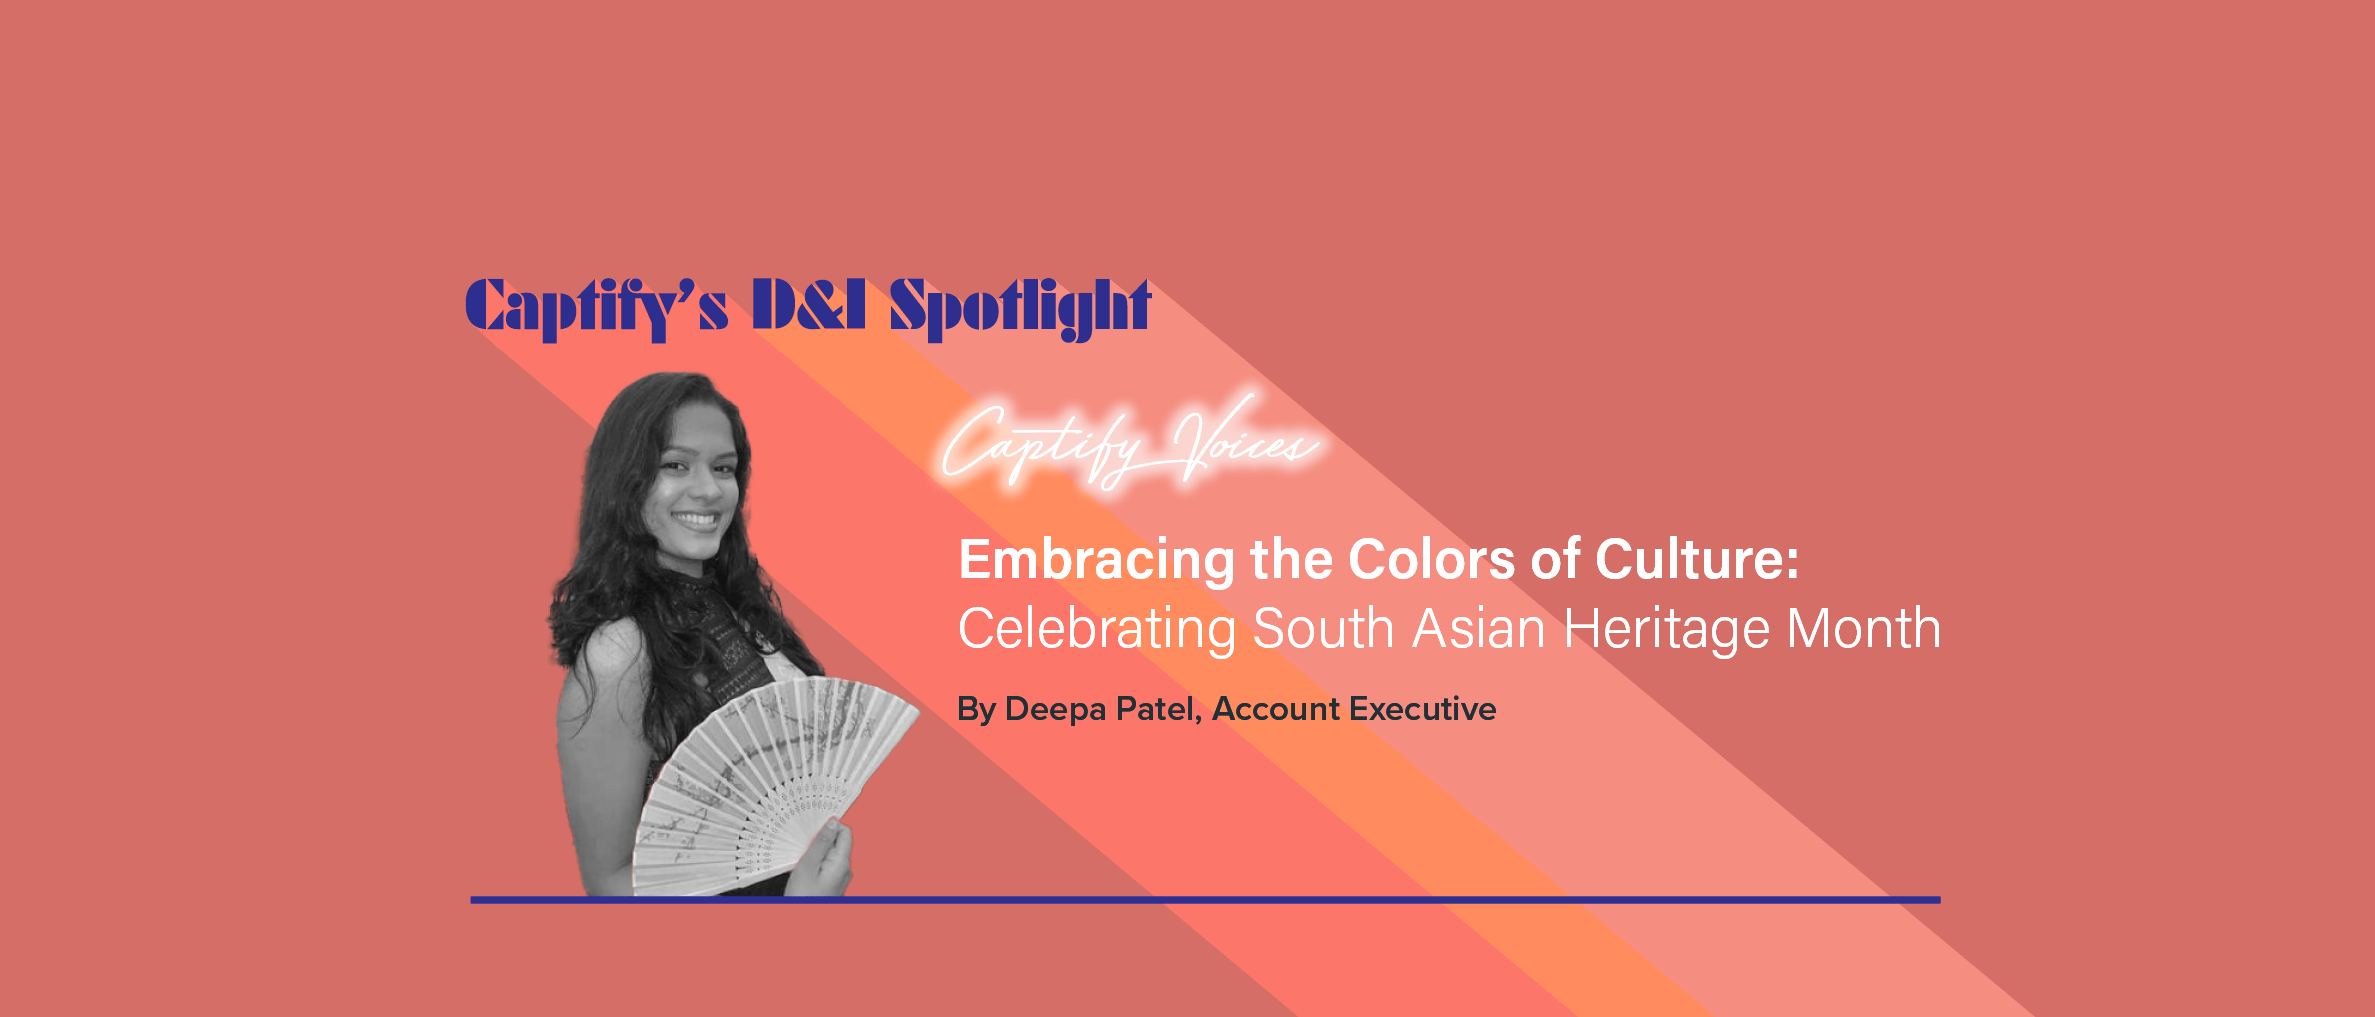 Embracing the Colors of Culture: Celebrating South Asian Heritage Month